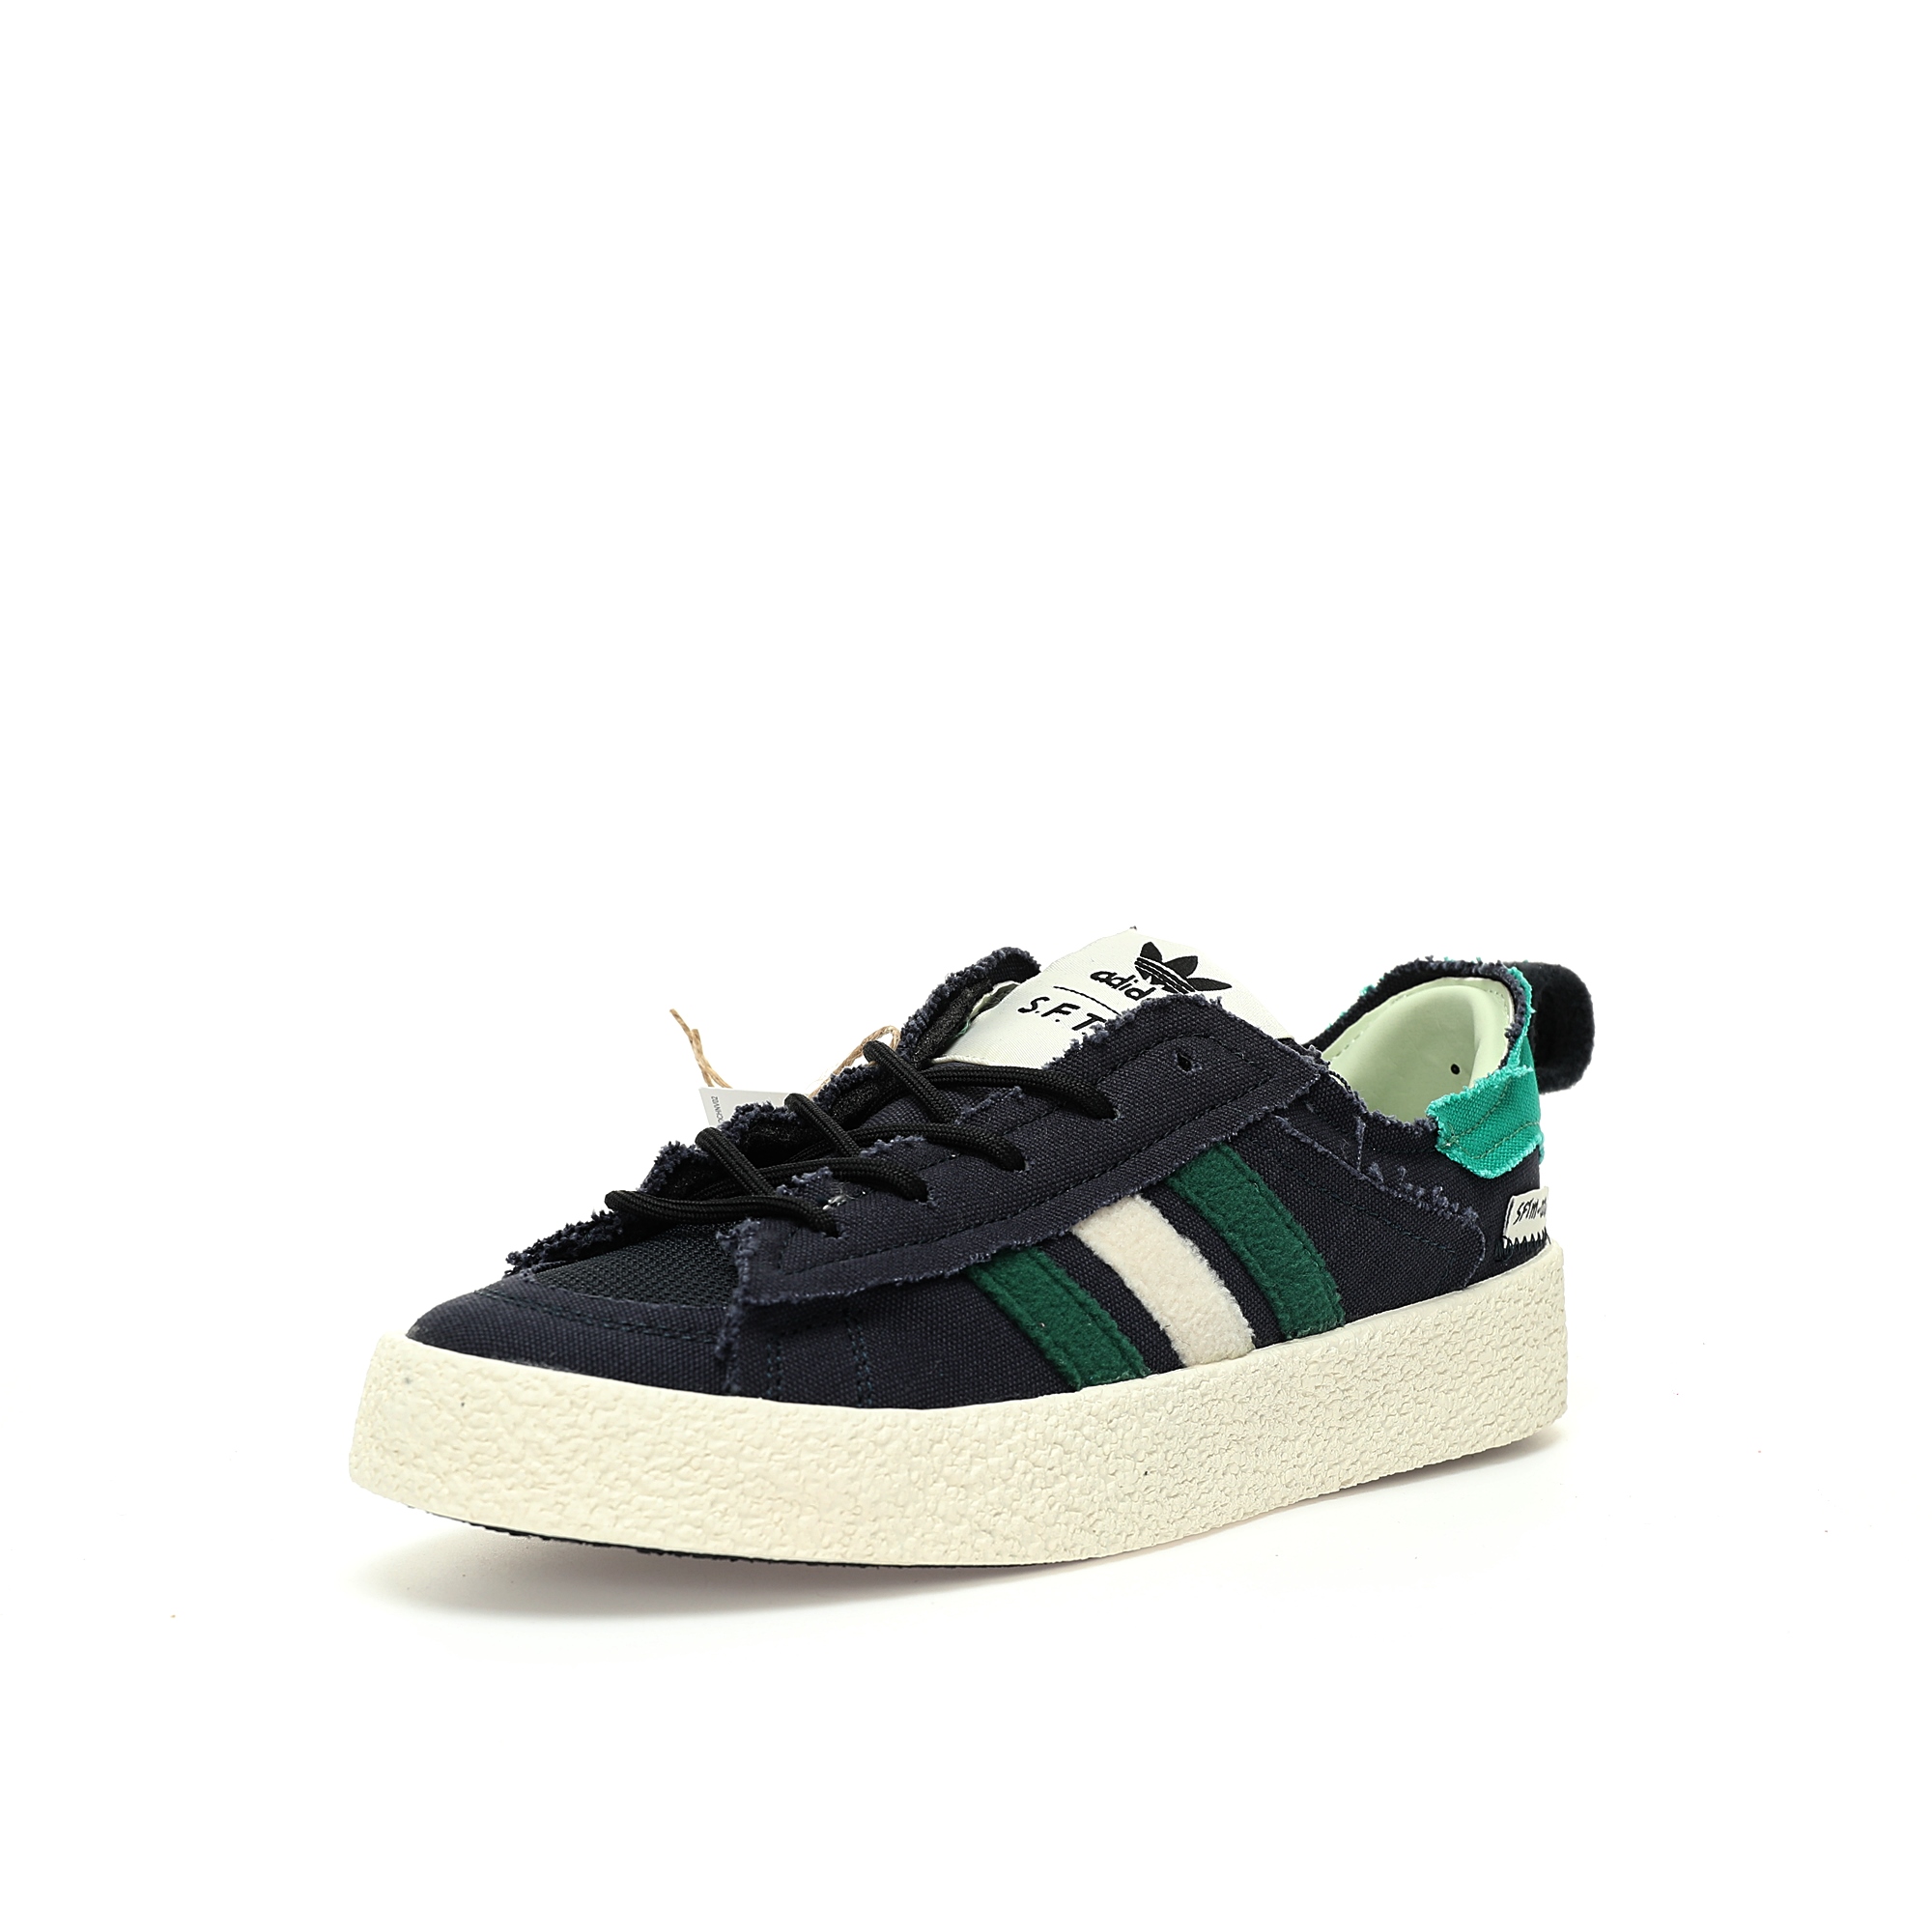 Replica Adidas Song for the Mute x adidas Originals  board shoes